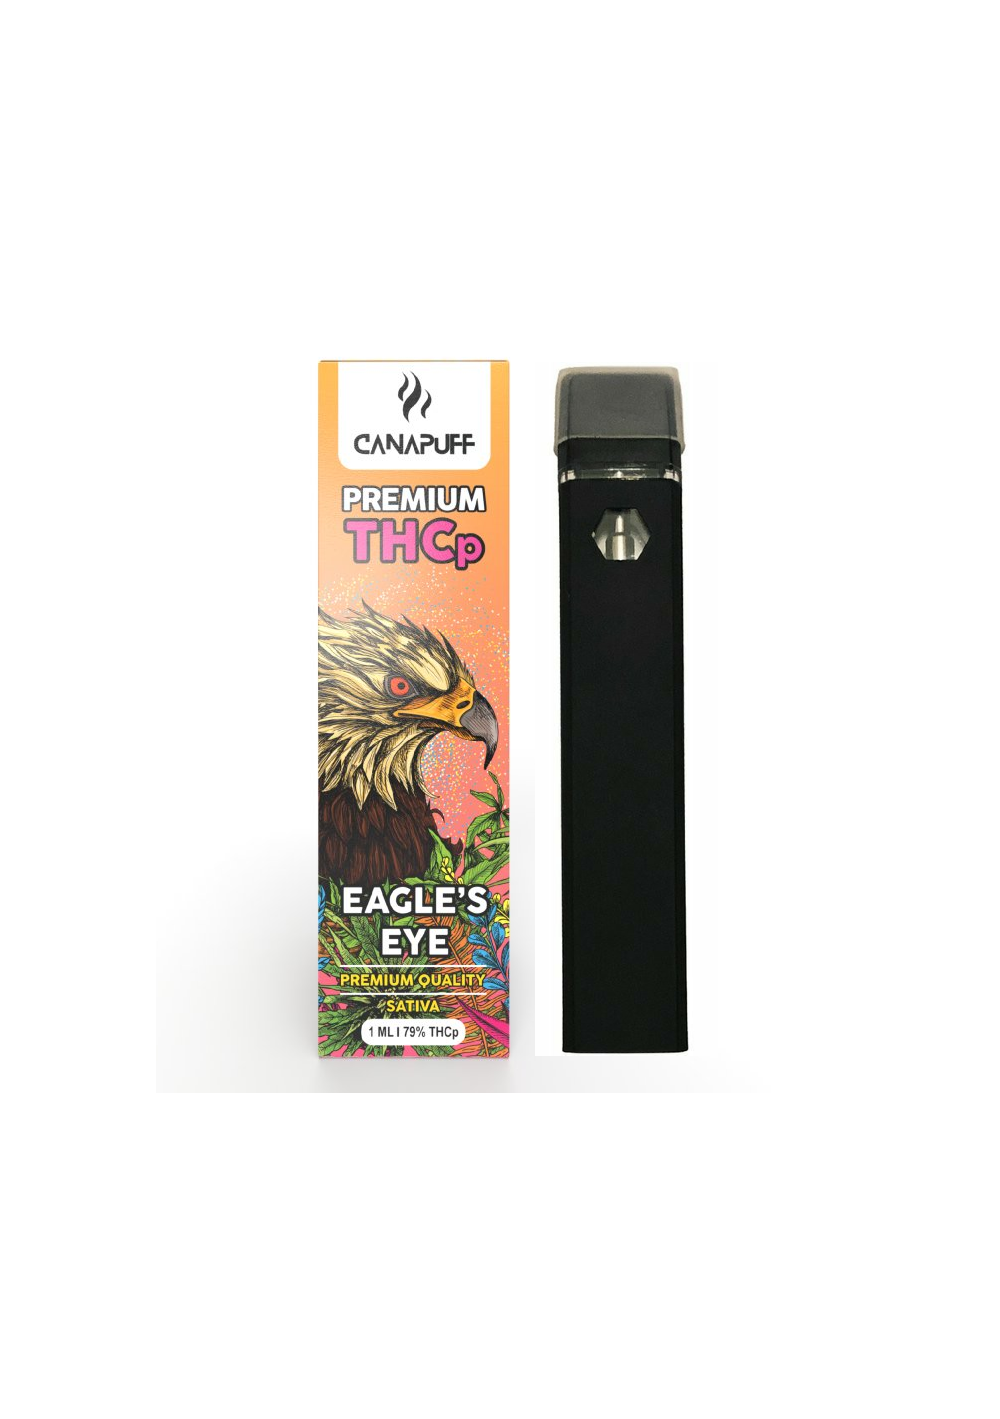 THC-P Vape Device 79% - Eagle Eye, 1ml, Disposable, 600 puffs - Canapuff